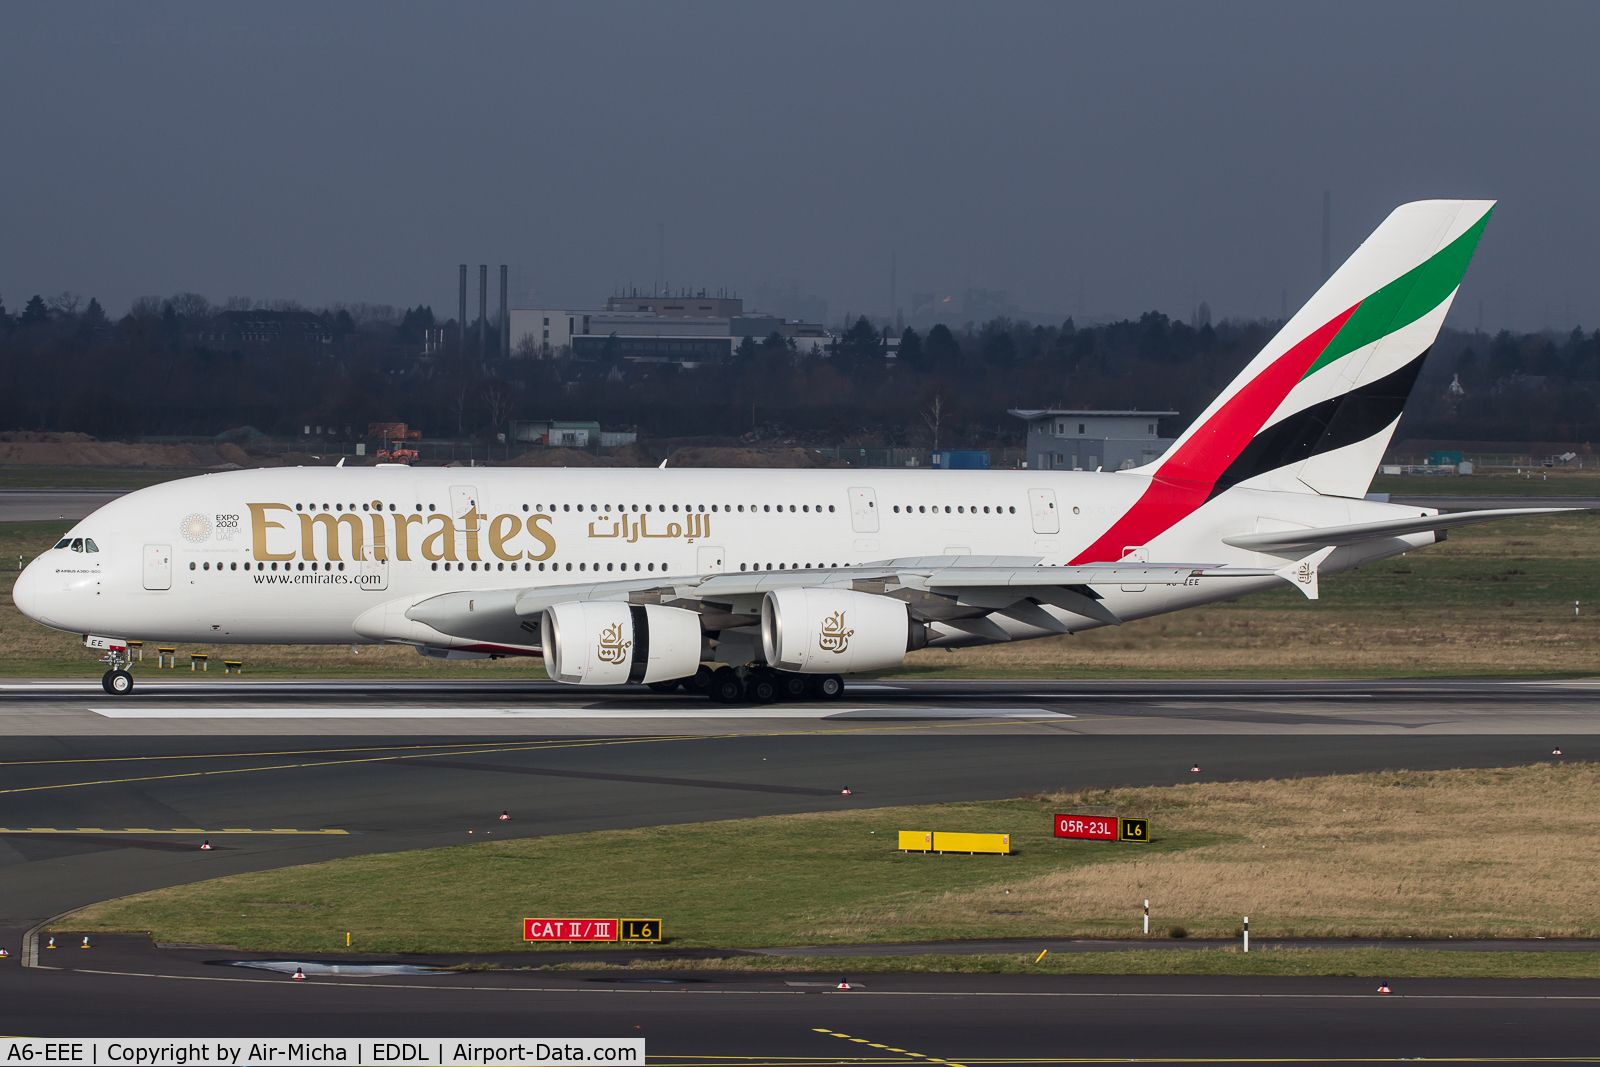 A6-EEE, 2012 Airbus A380-861 C/N 112, Emirates